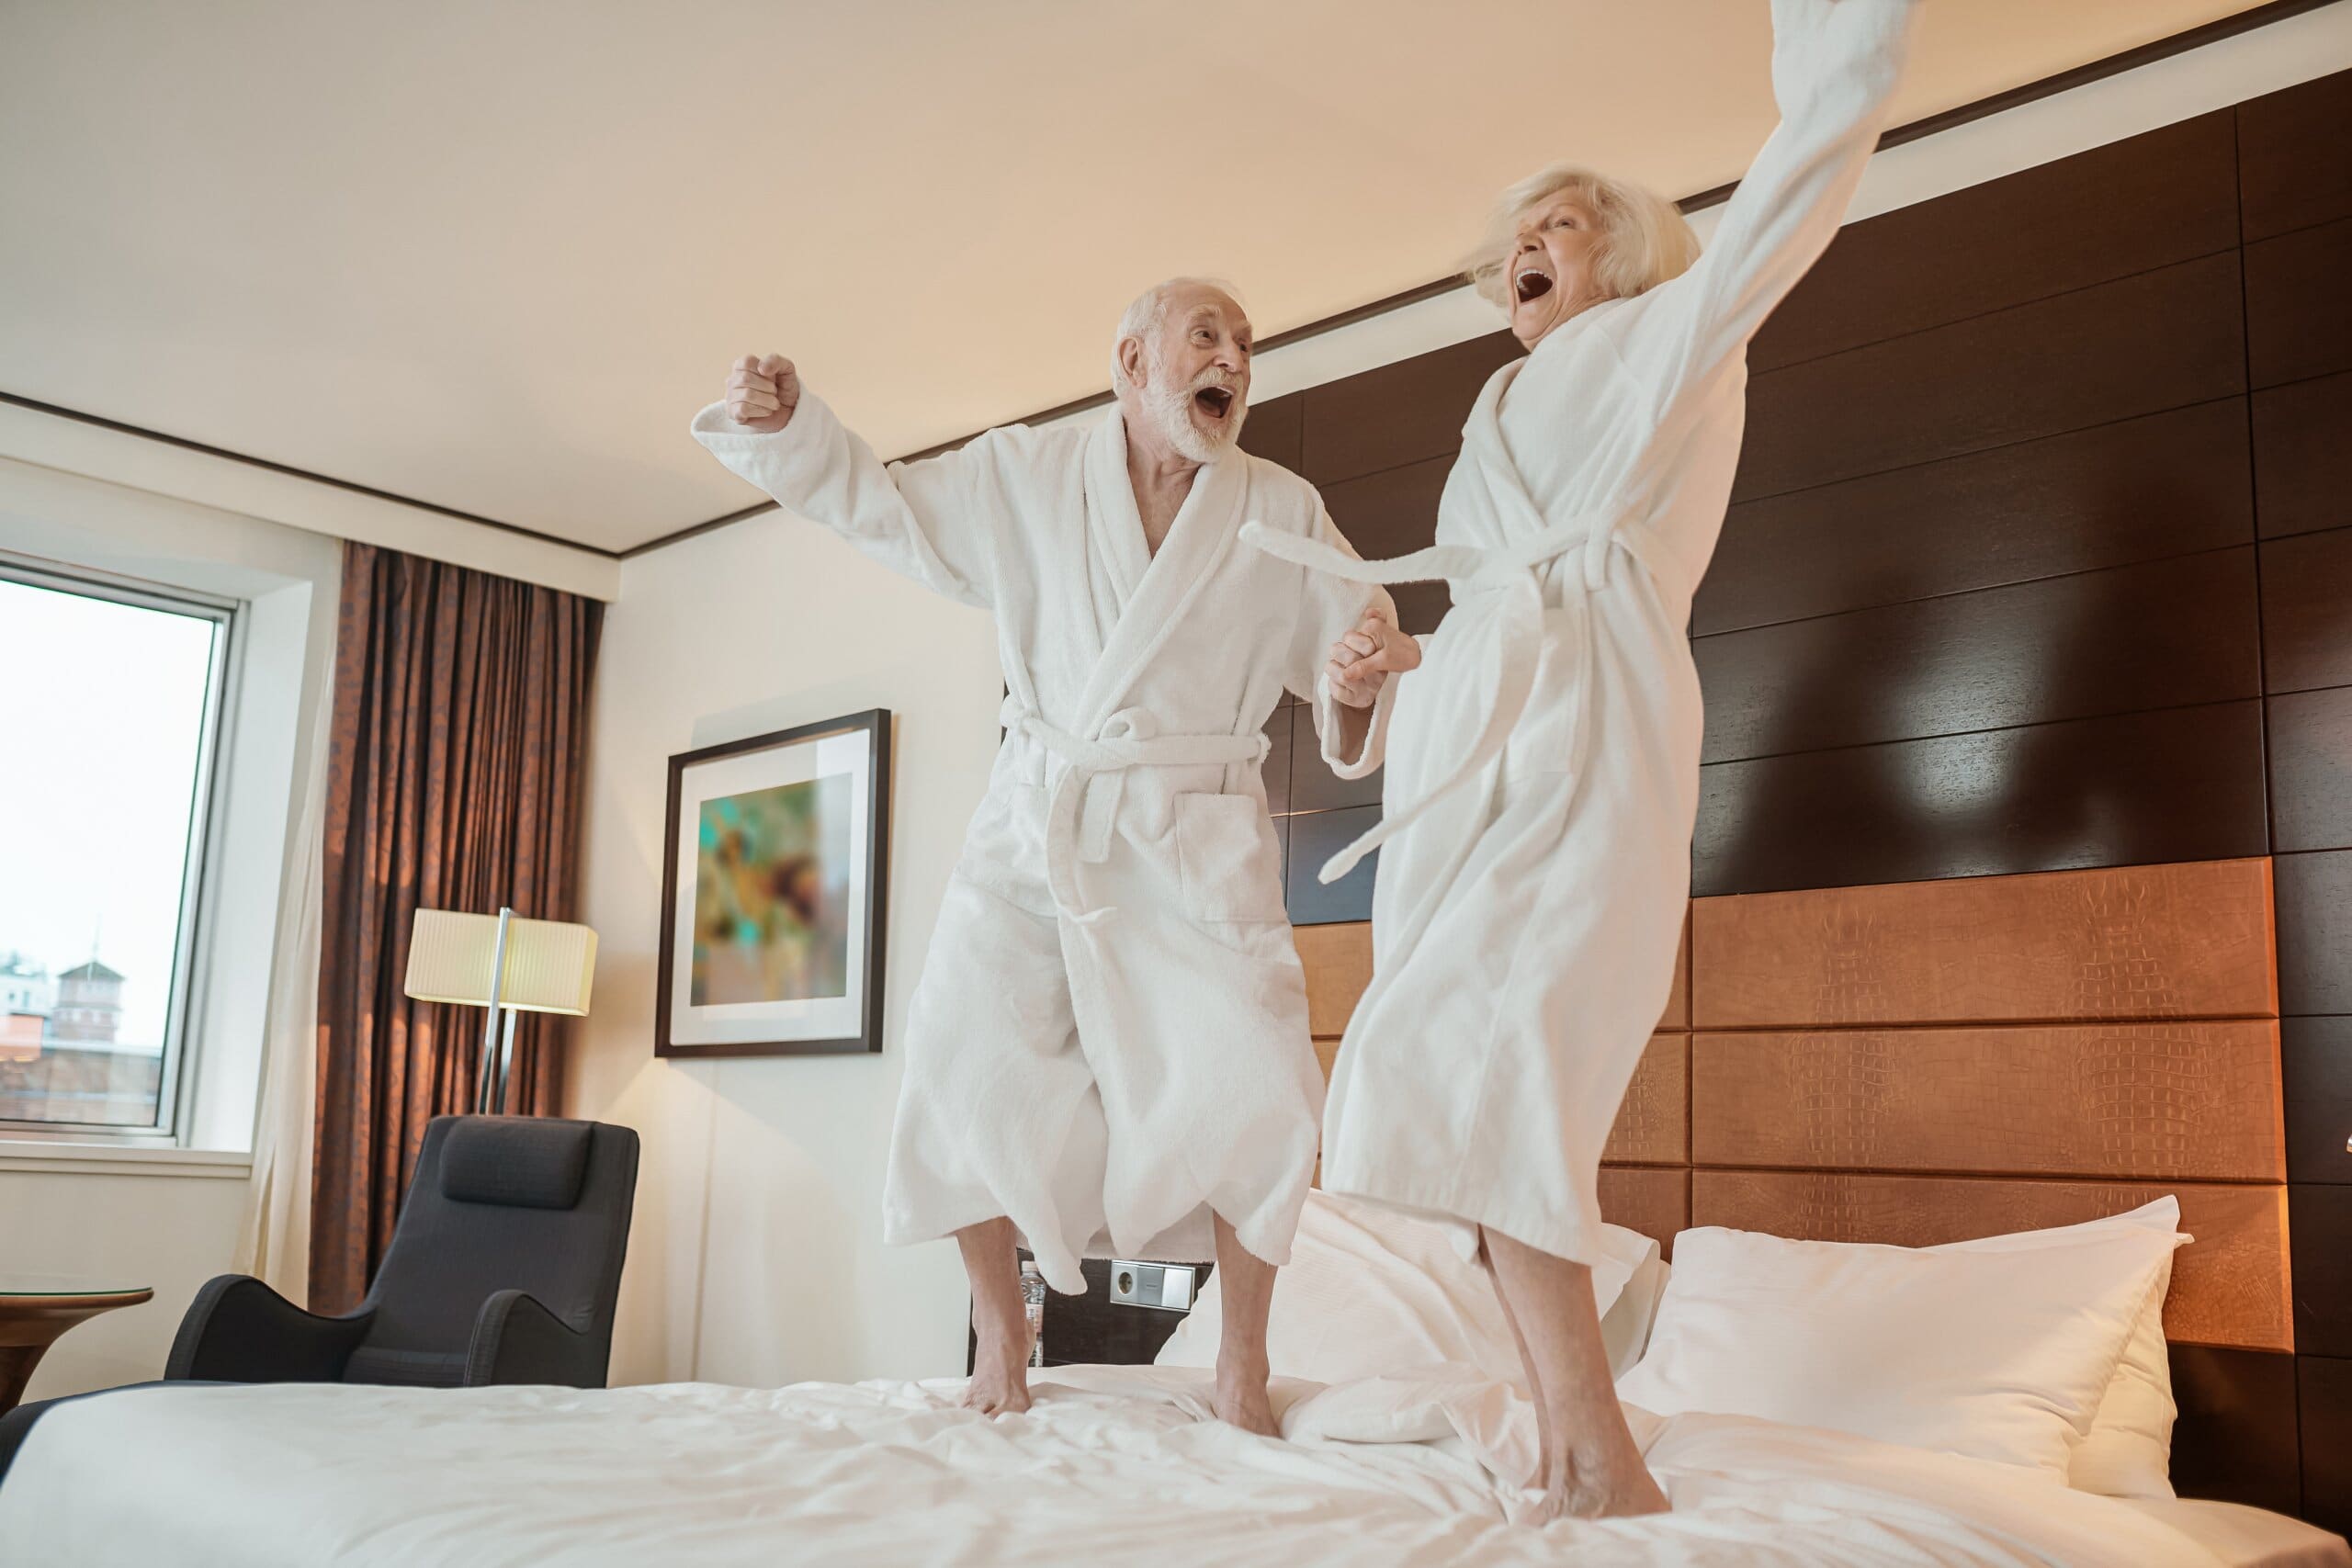 Senior couple in white dressing downs holding hands and jumping on a bed.